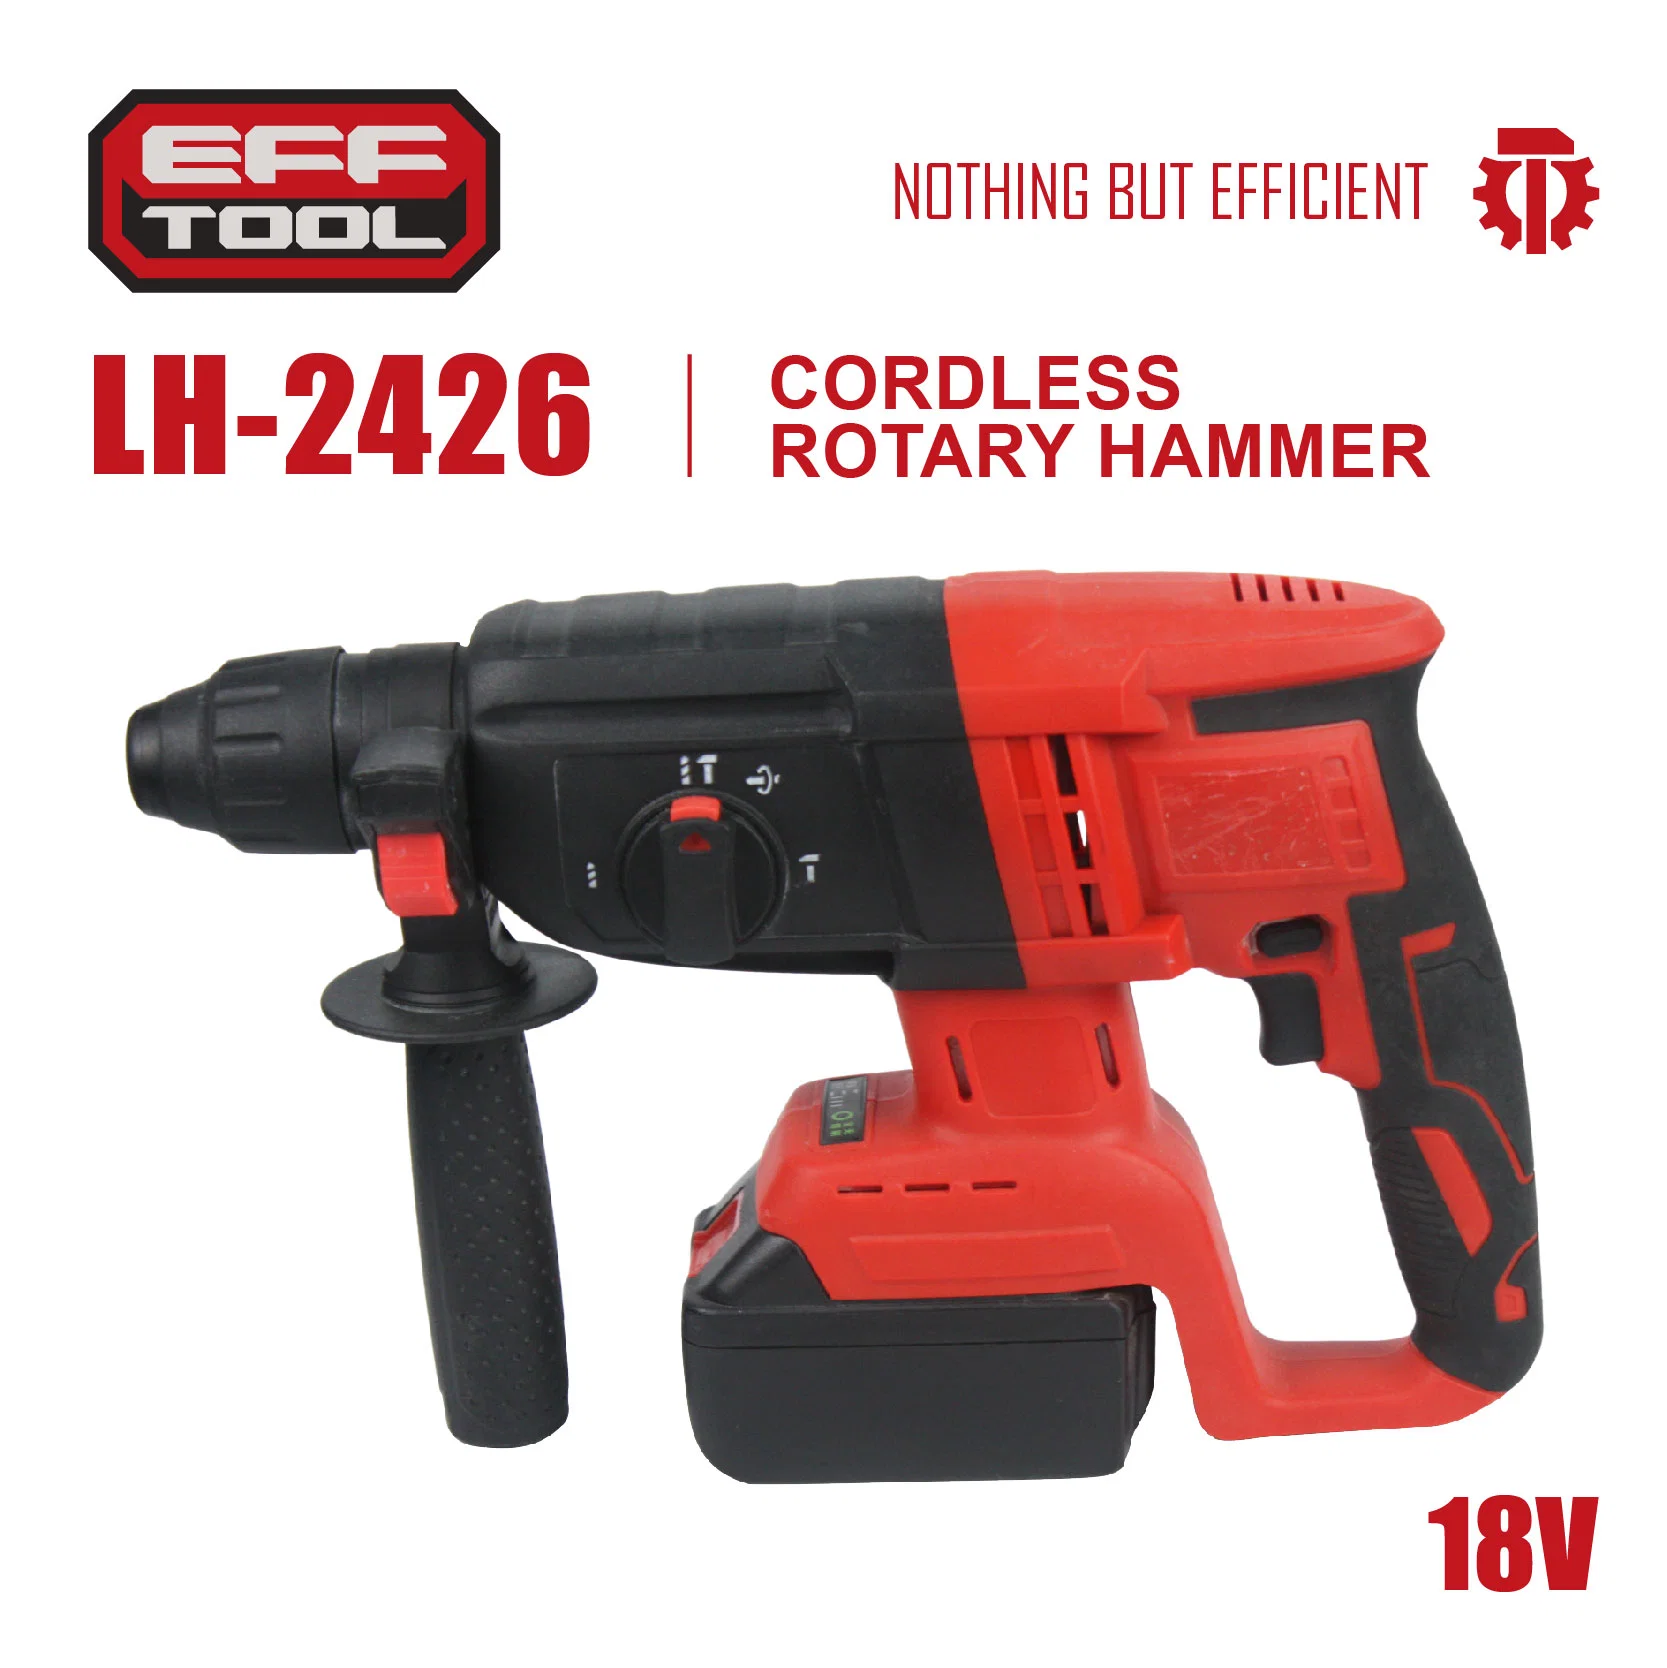 Efftool 21V Super Powerful Lithium-Ion Battery Cordless Rotary Hammer